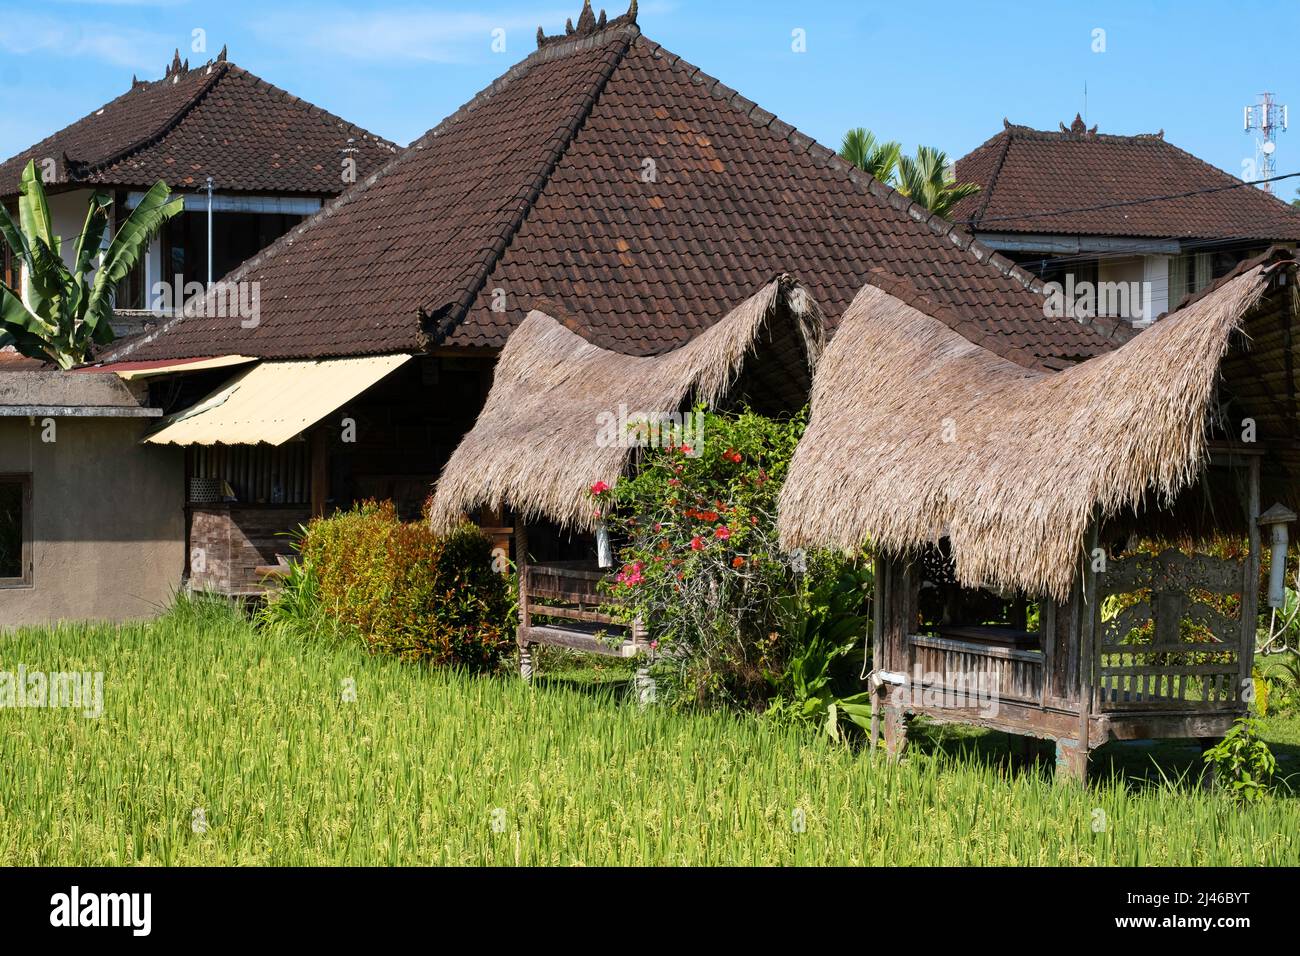 Several thatched roof huts in green field in Bali, Indonesia with blue sky background Stock Photo